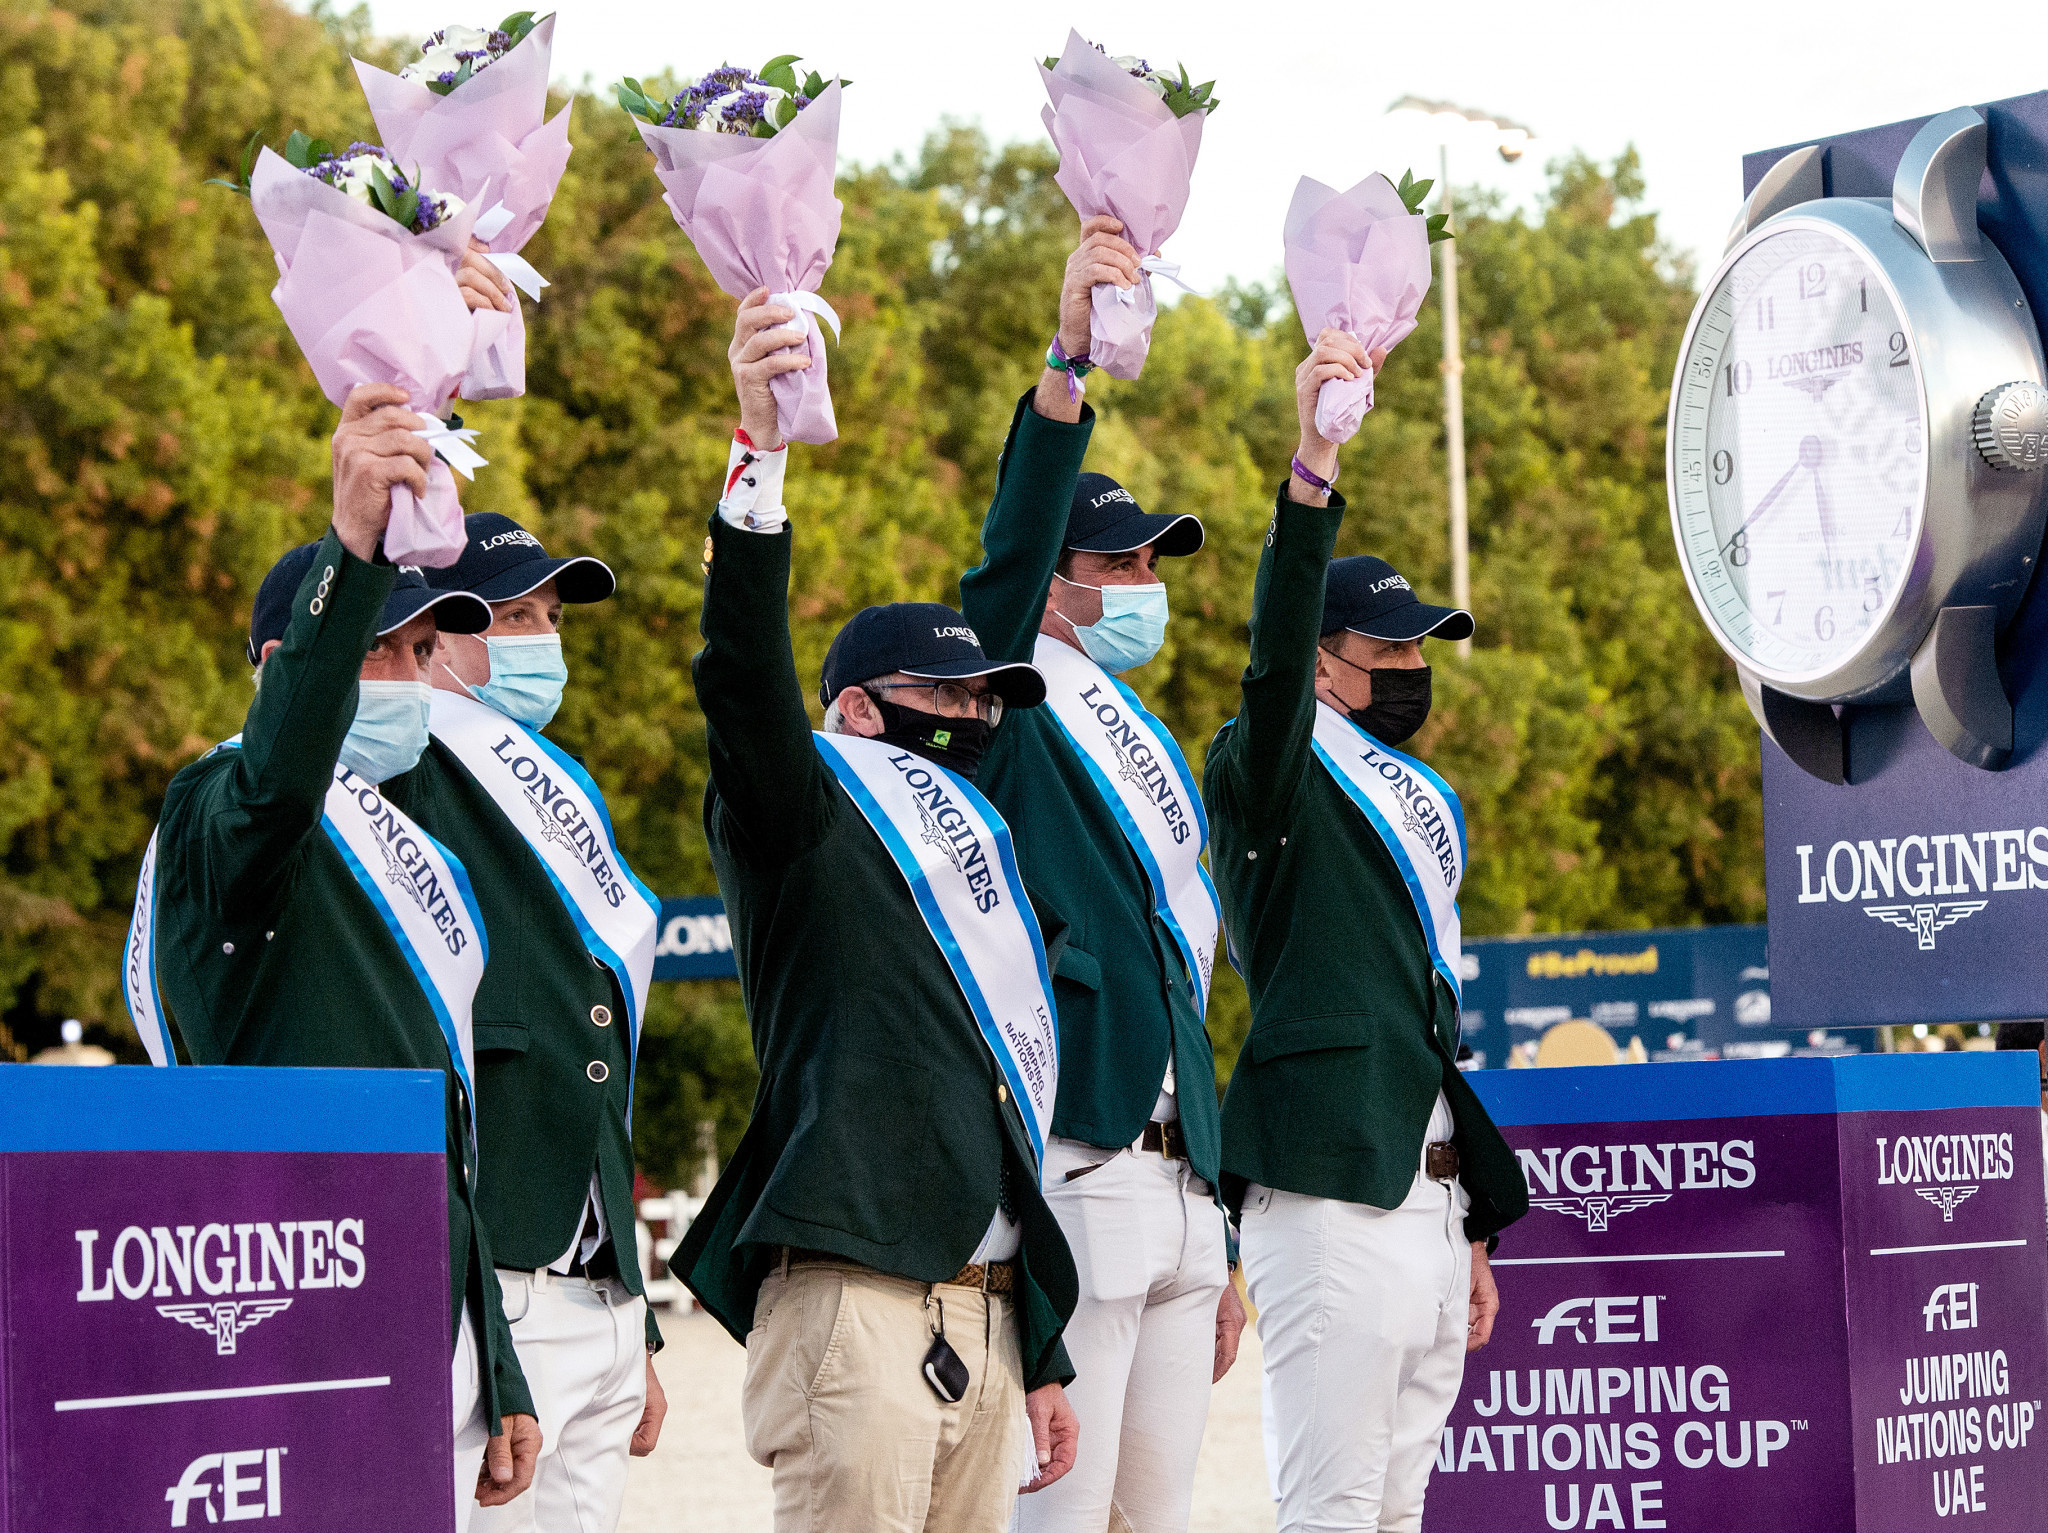 Ireland produced a perfect score of zero to win the opening event of the 2022 Jumping Nations Cup series ©FEI/Martin Dokoupil